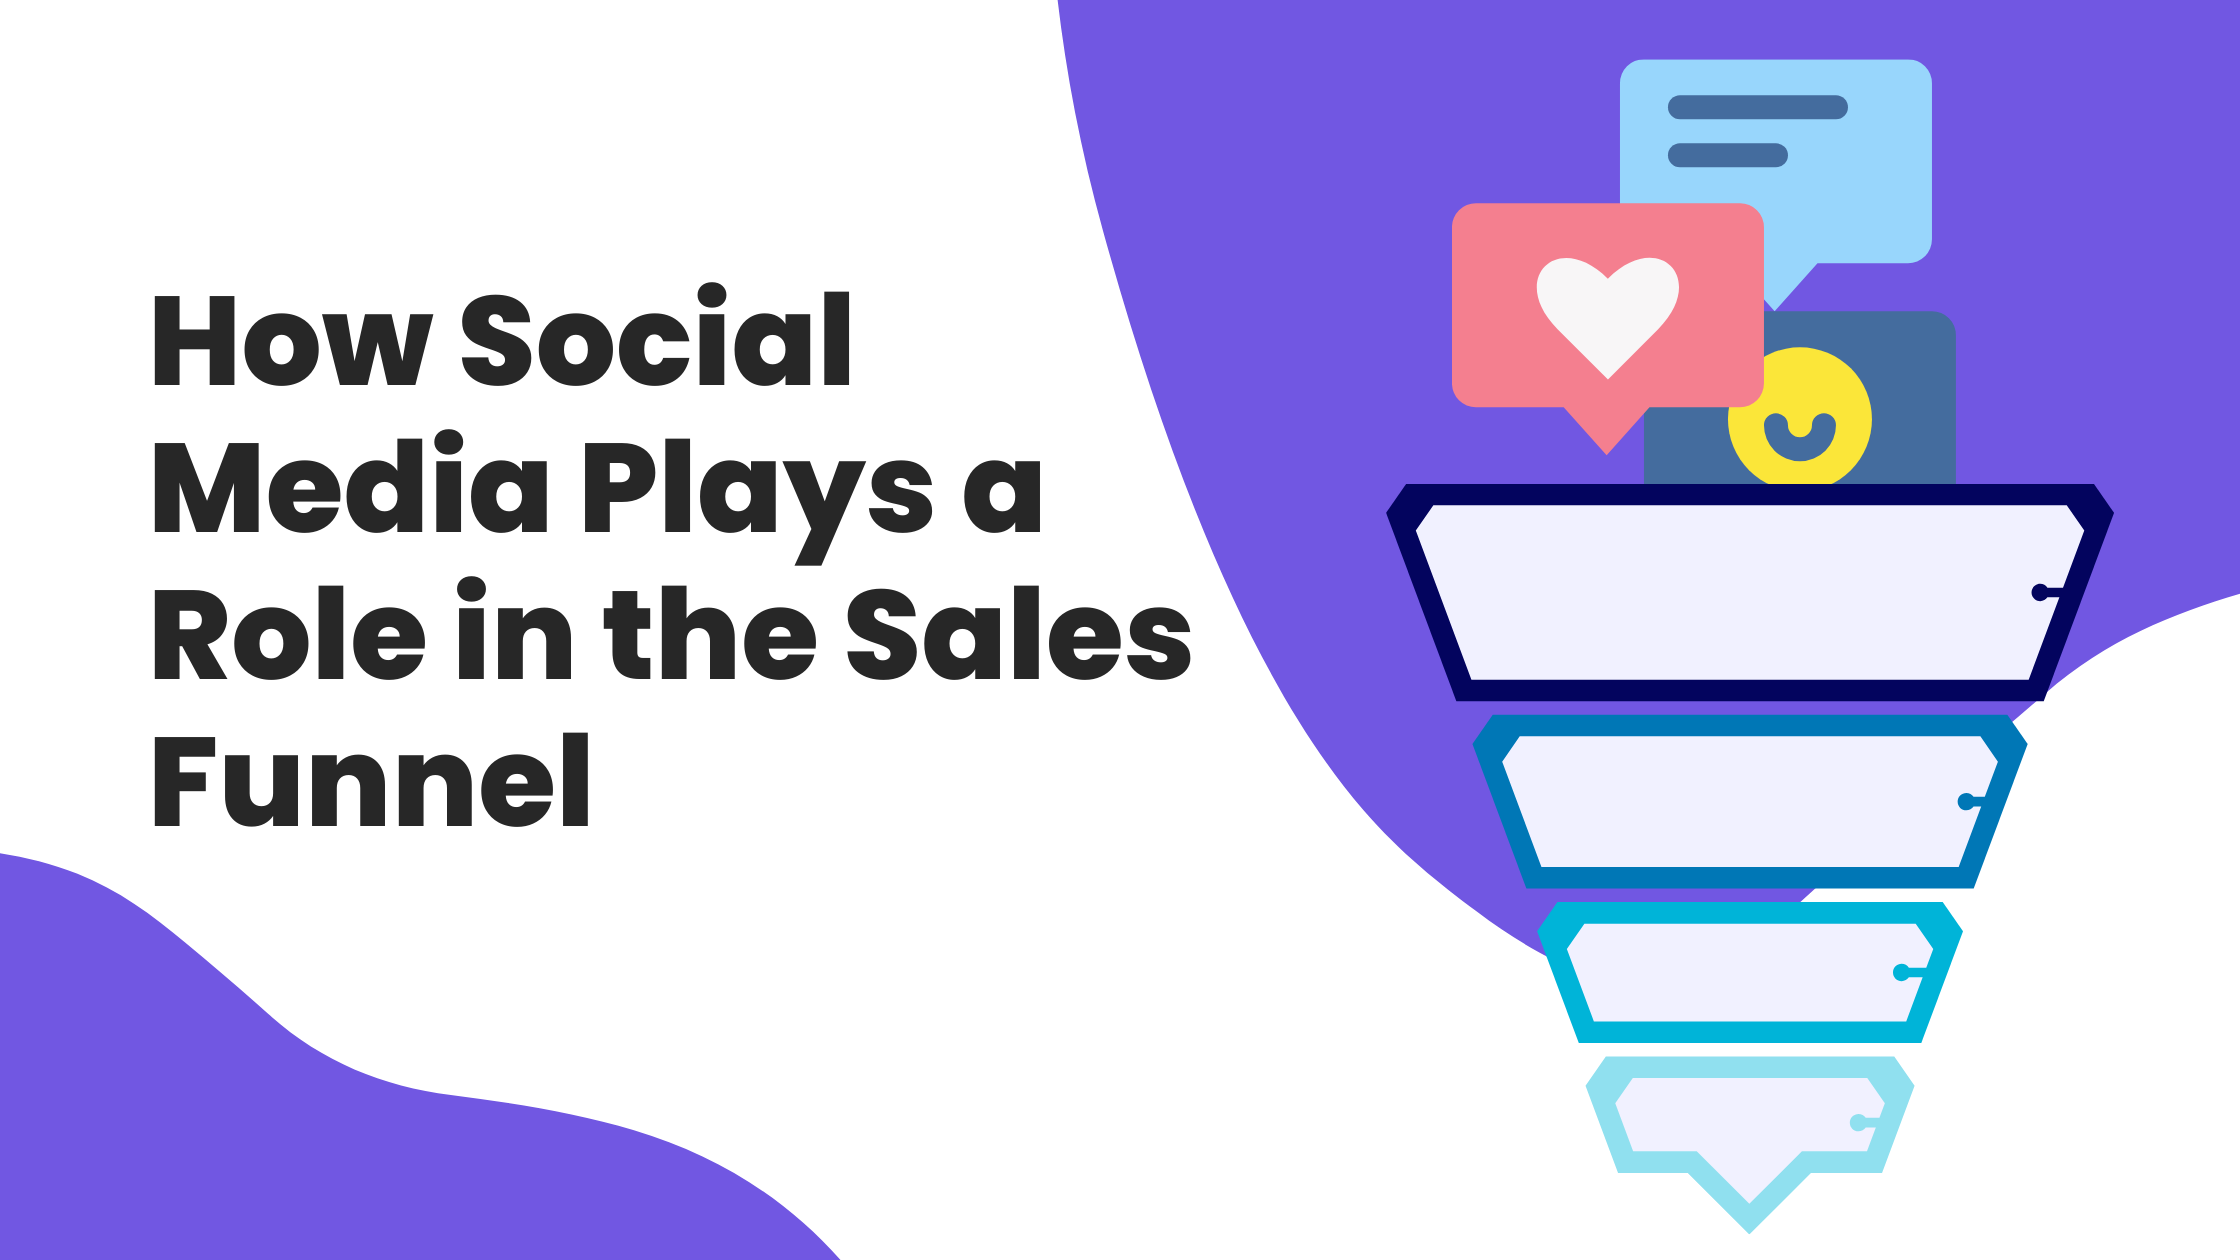 How Social Media Plays a Role in the Sales Funnel